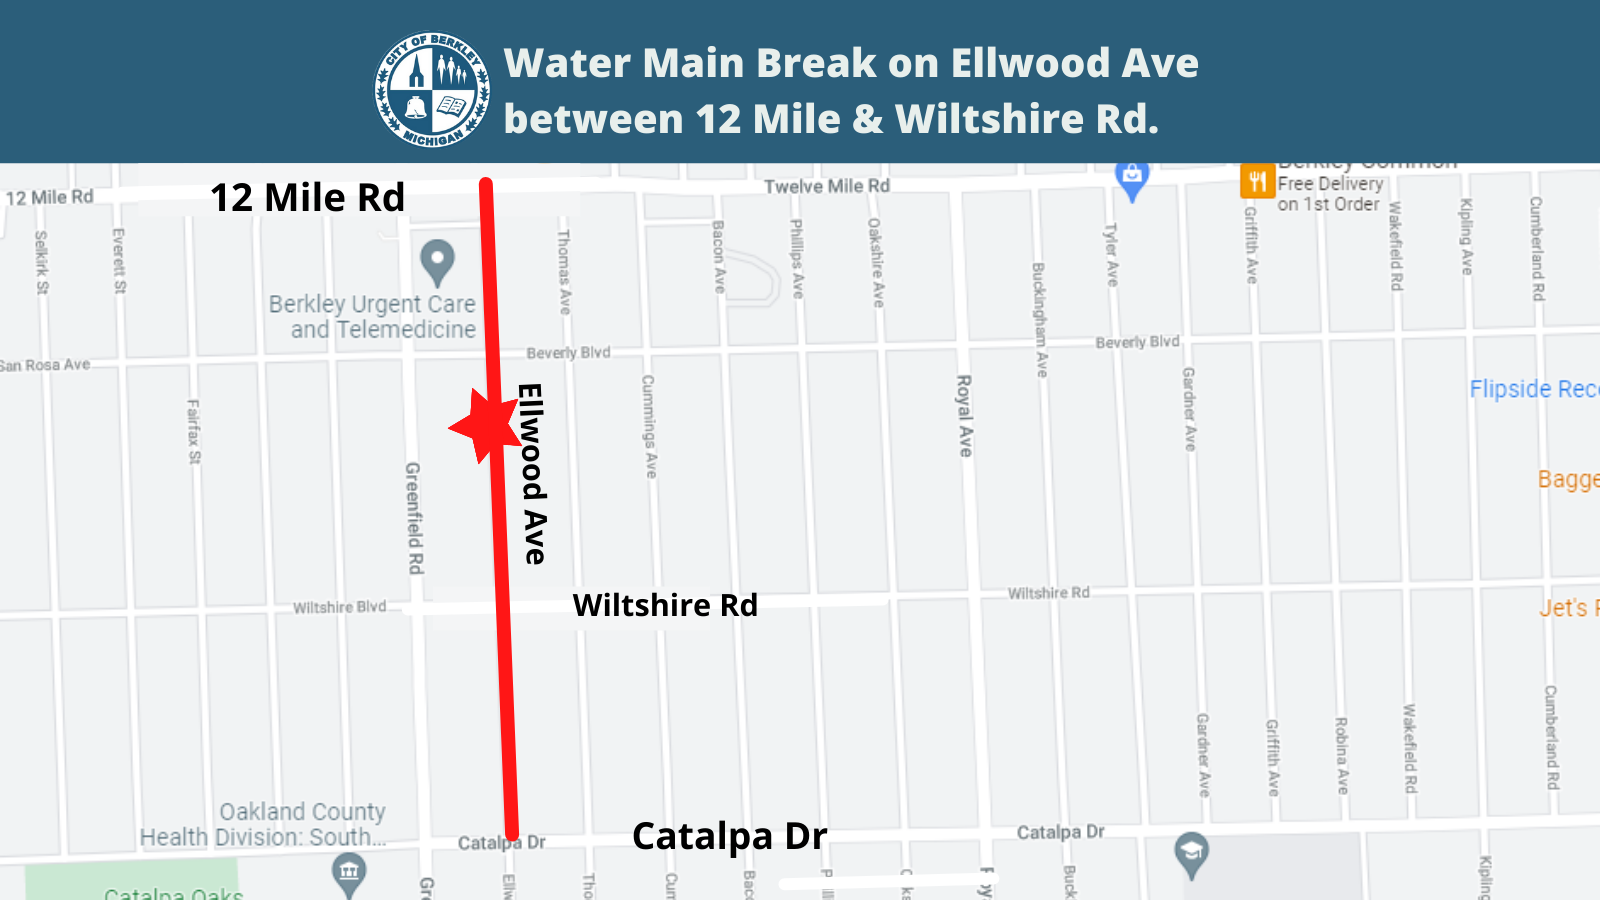 Water Main Break Maps_Ellwood btwn 12 mile and wiltshire